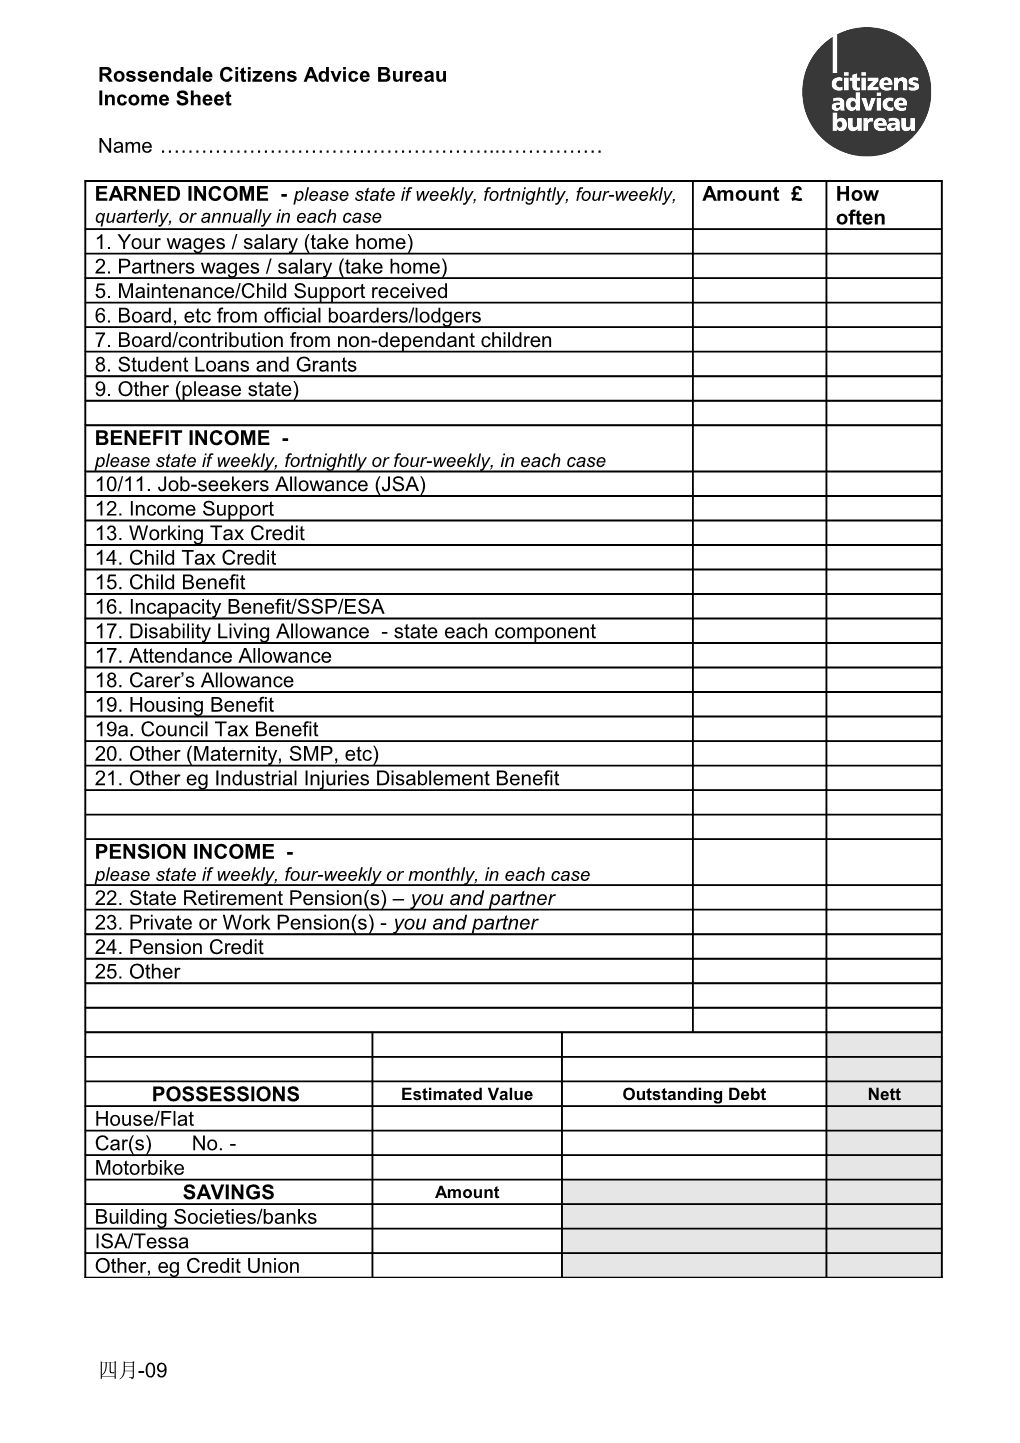 Income/Expenditure Sheet